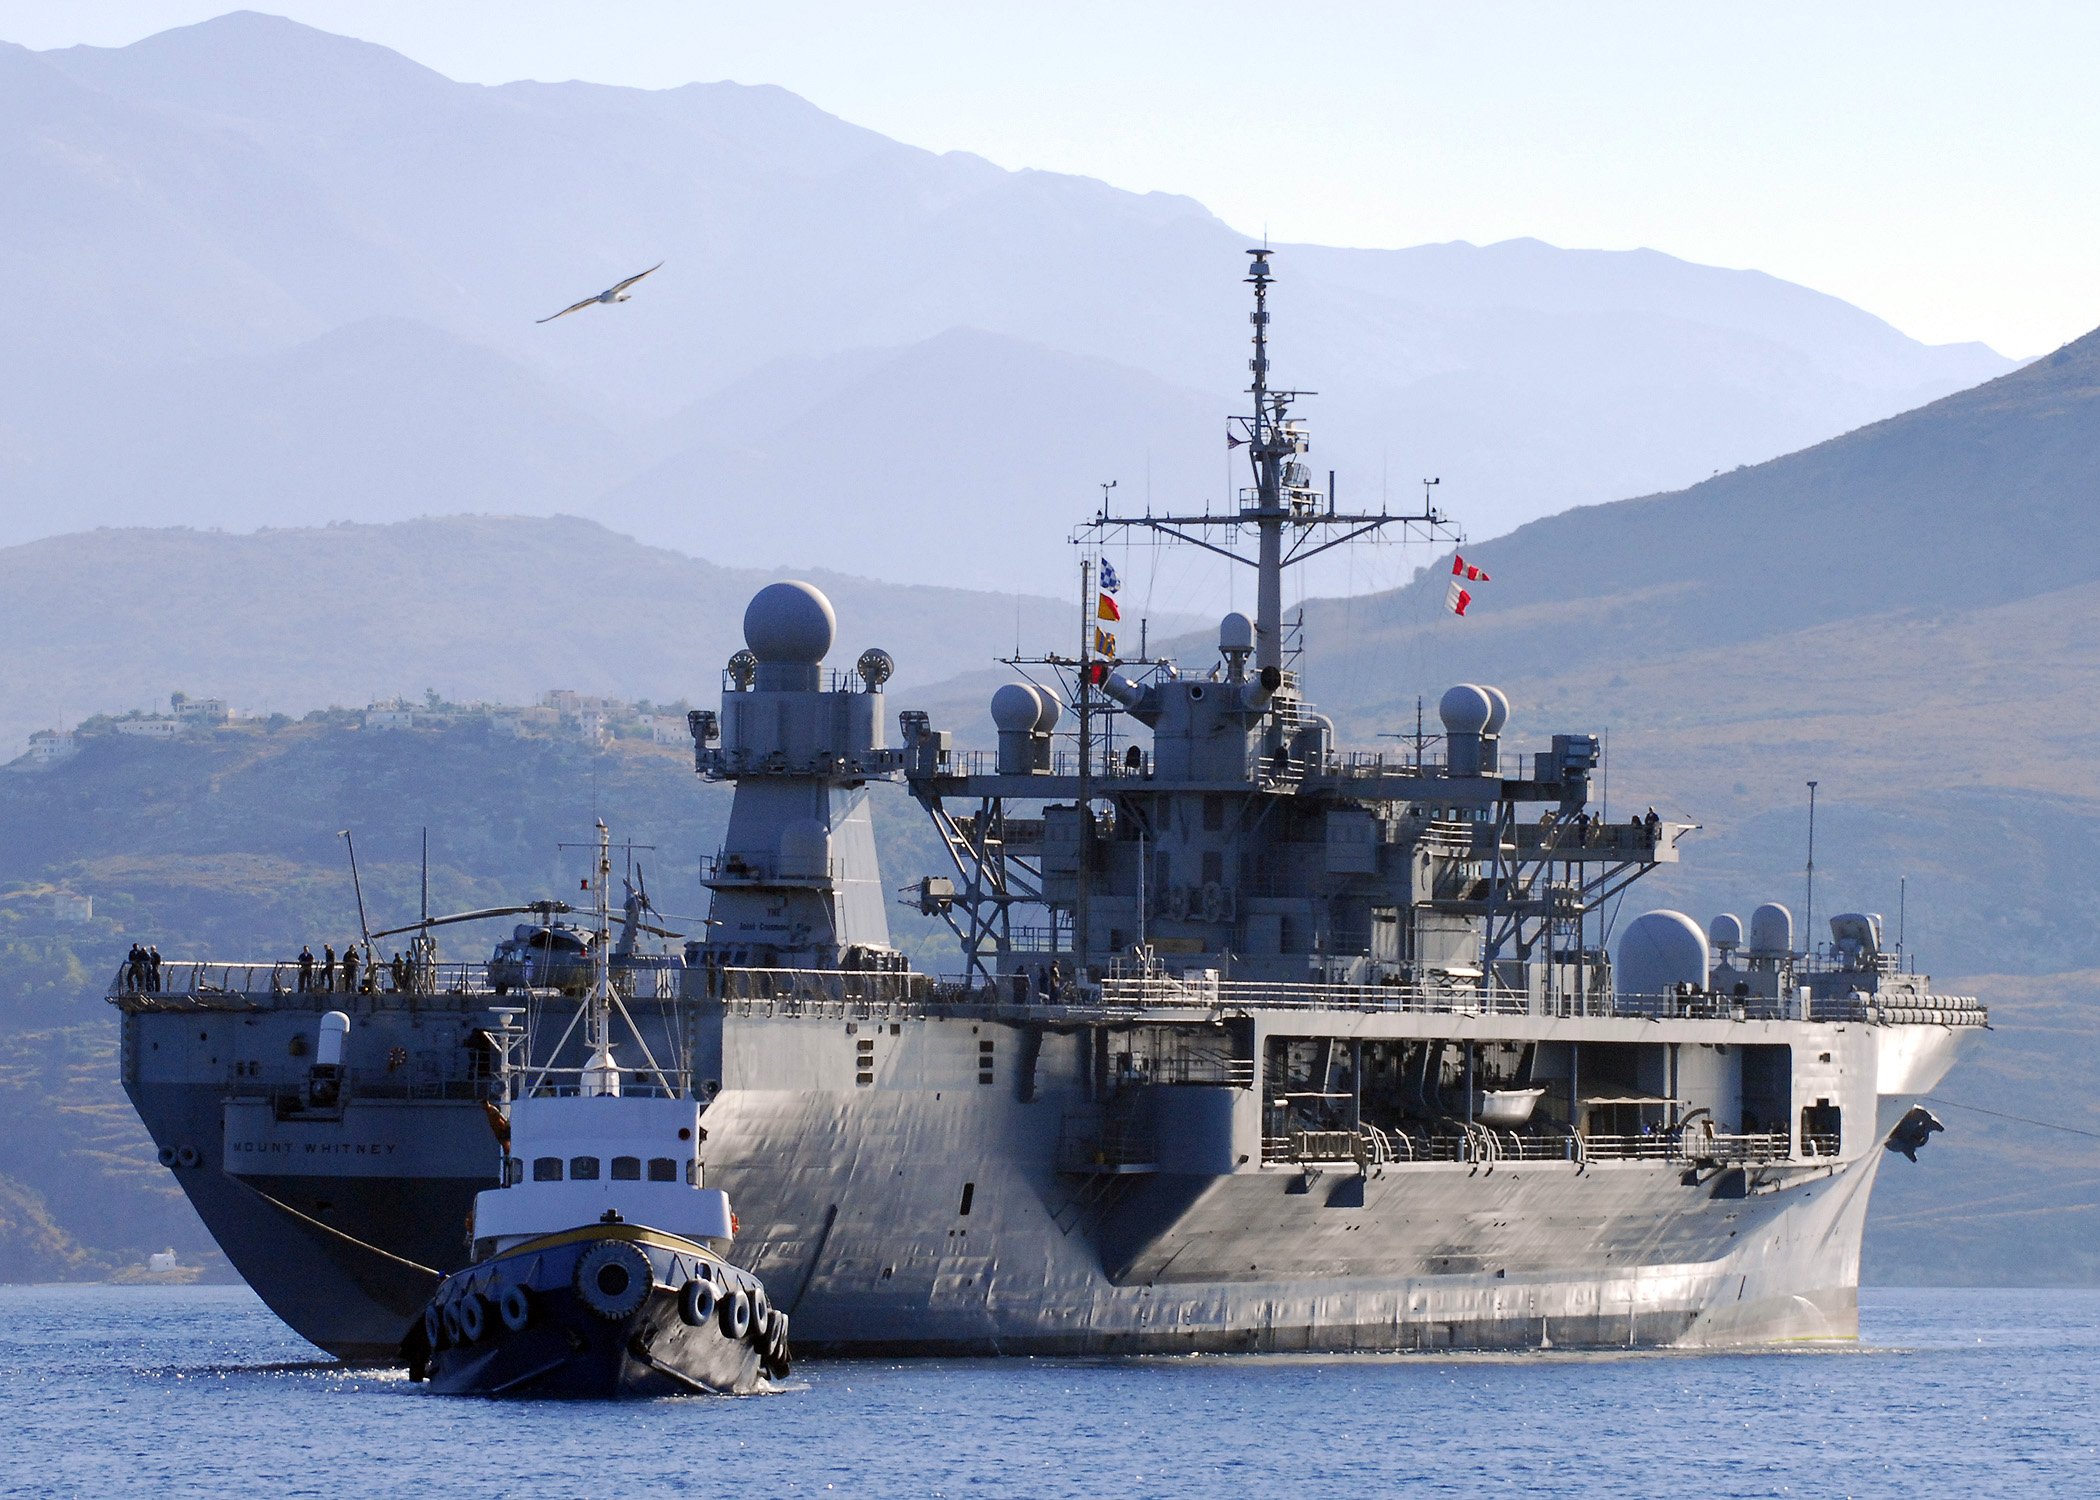 US Navy 070918-N-0780F-001 The 6th Fleet flagship USS Mount Whitney (LCC 20) arrives in Souda harbor for a brief port visit on Greece's largest island